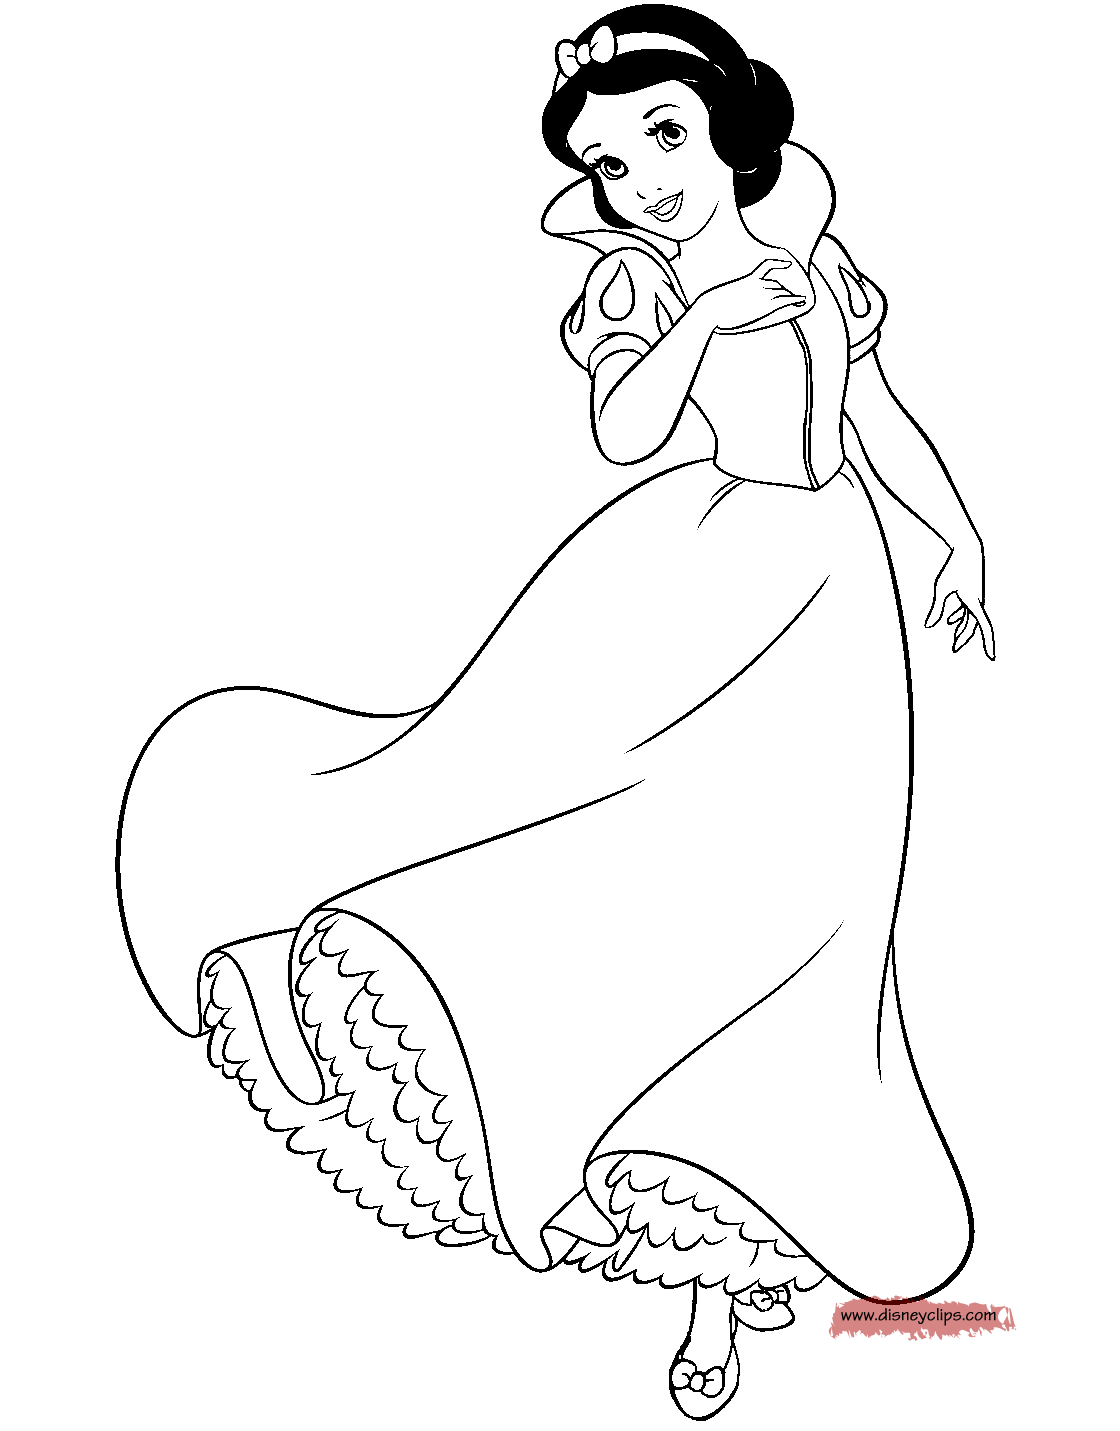 snow white coloring snow white coloring pages best coloring pages for kids snow coloring white 1 1